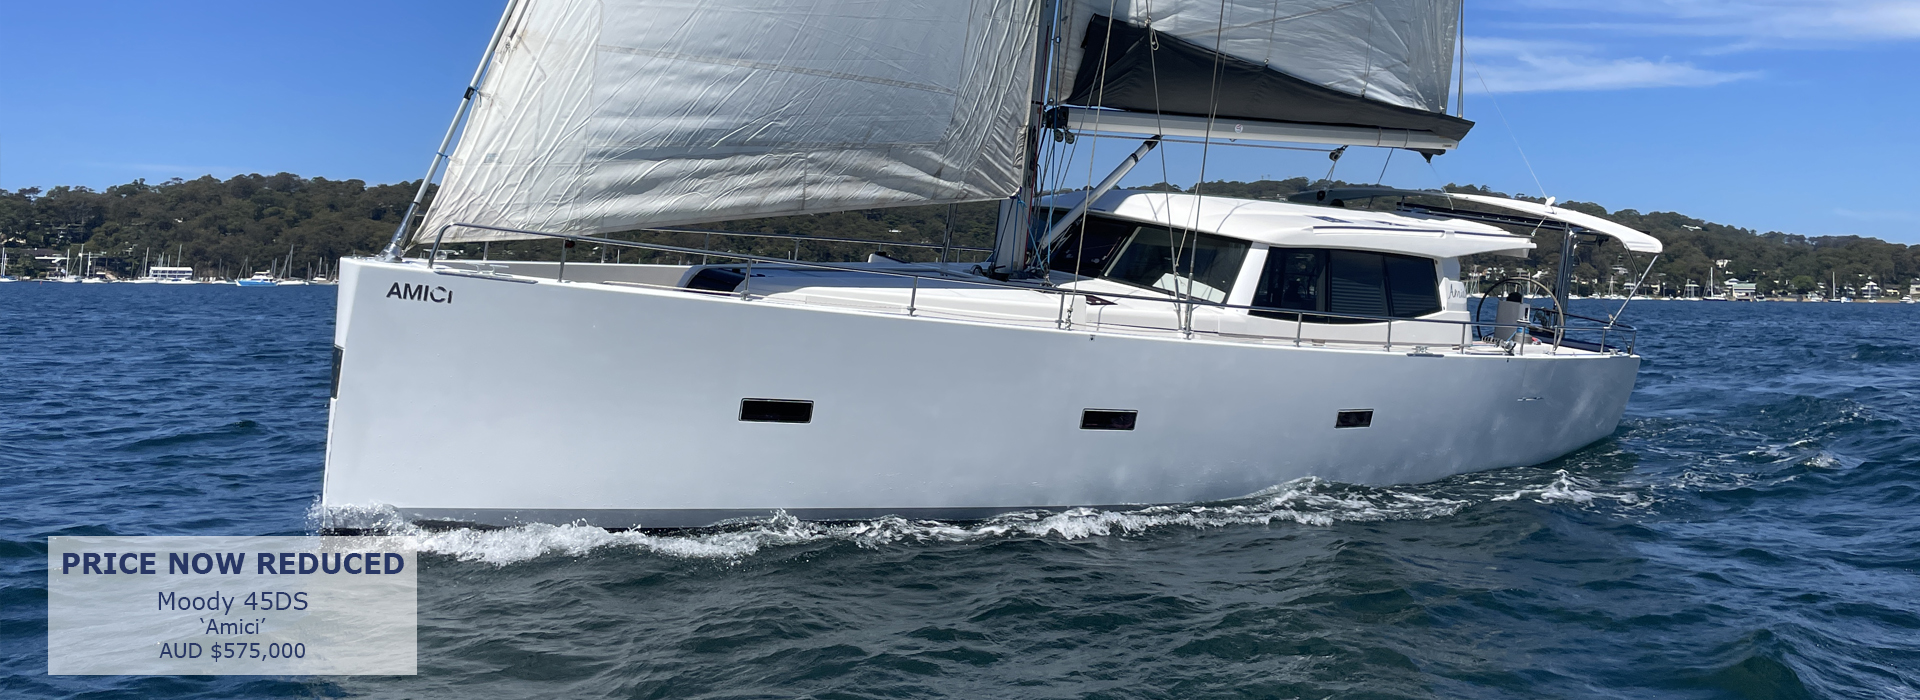 yacht brokers pittwater nsw